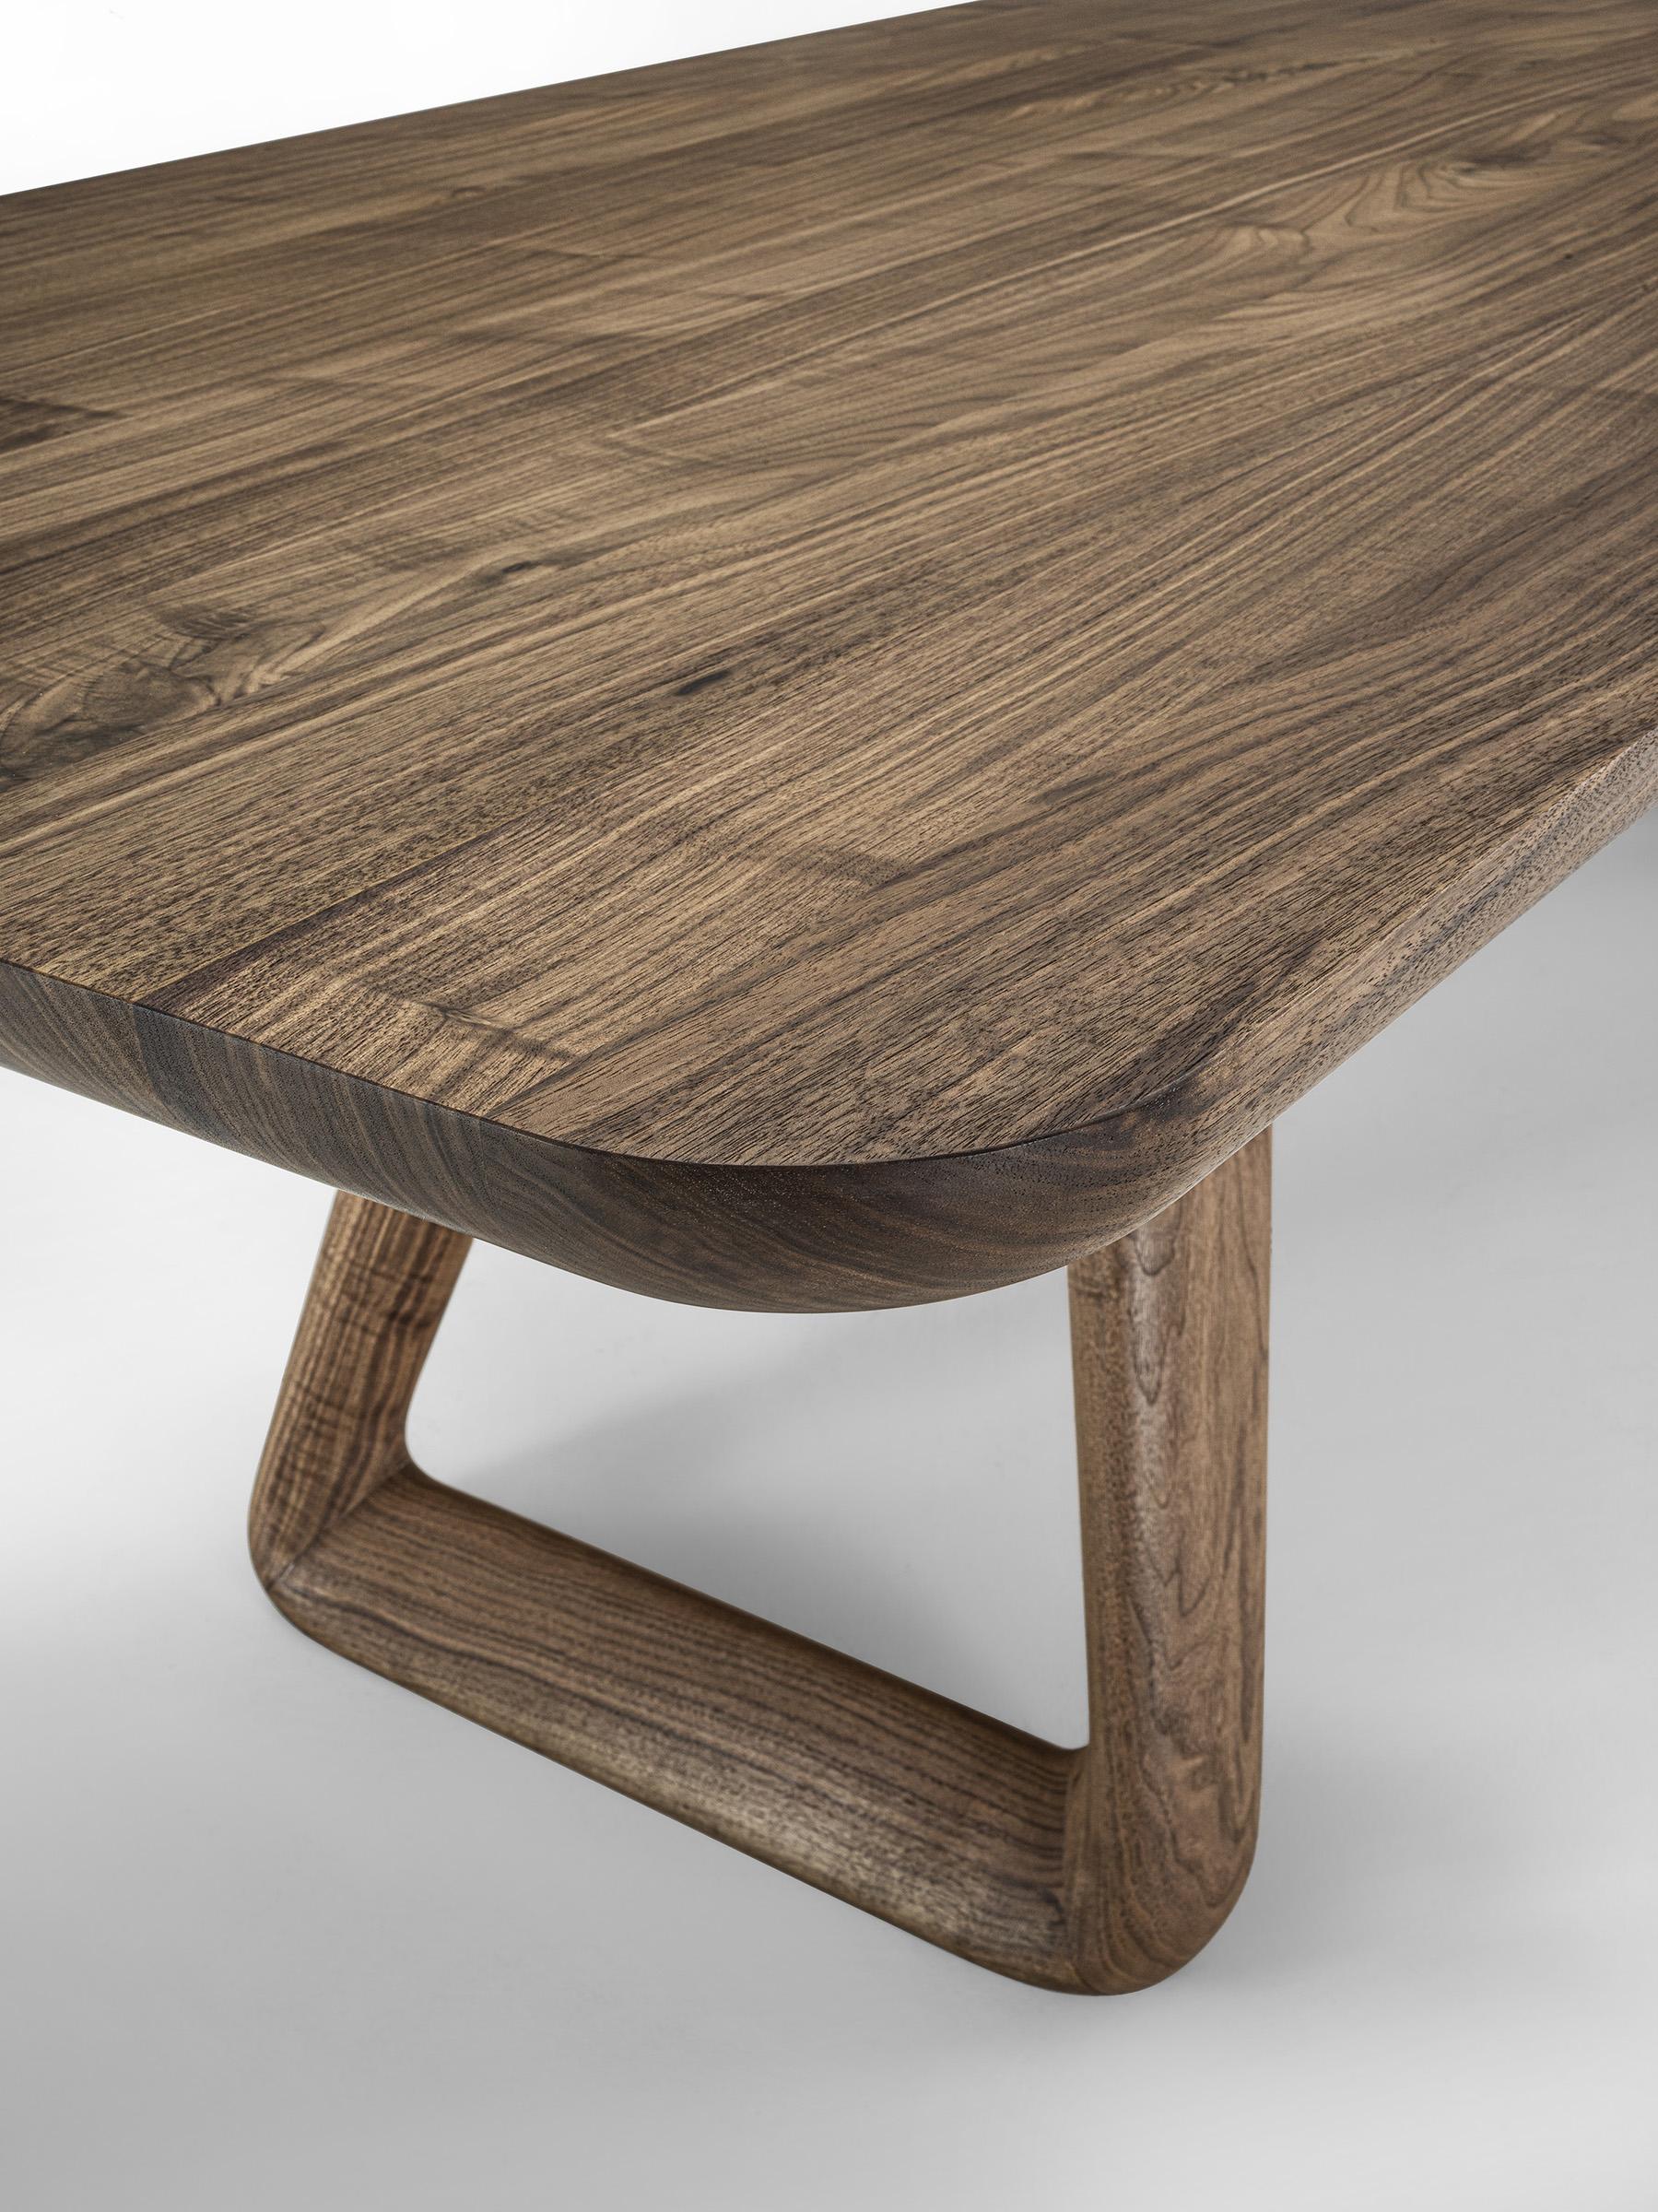 Sospiro Wood Dining Table, Designed by Claudio Bellini, Made in Italy For Sale 3